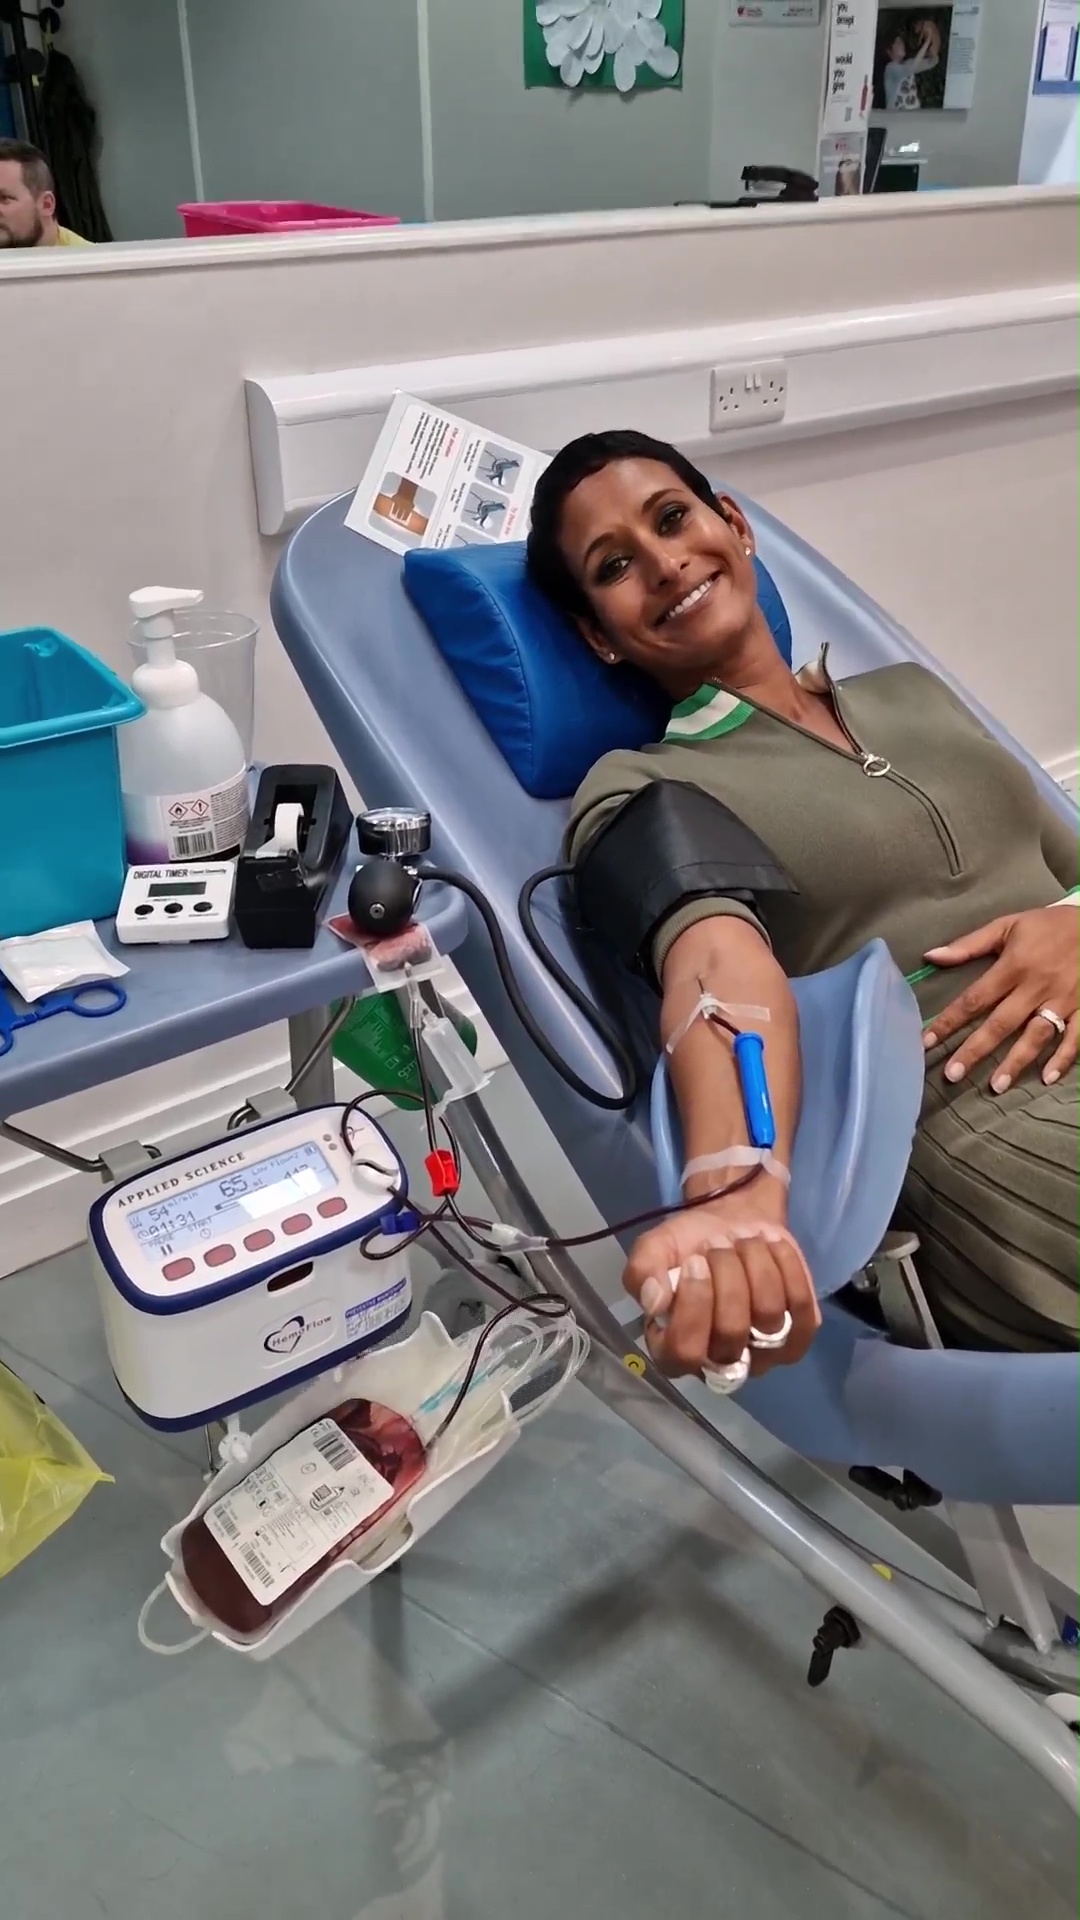 Naga Munchetty flooded with support from BBC Breakfast fans as she shares pic from hospital bed